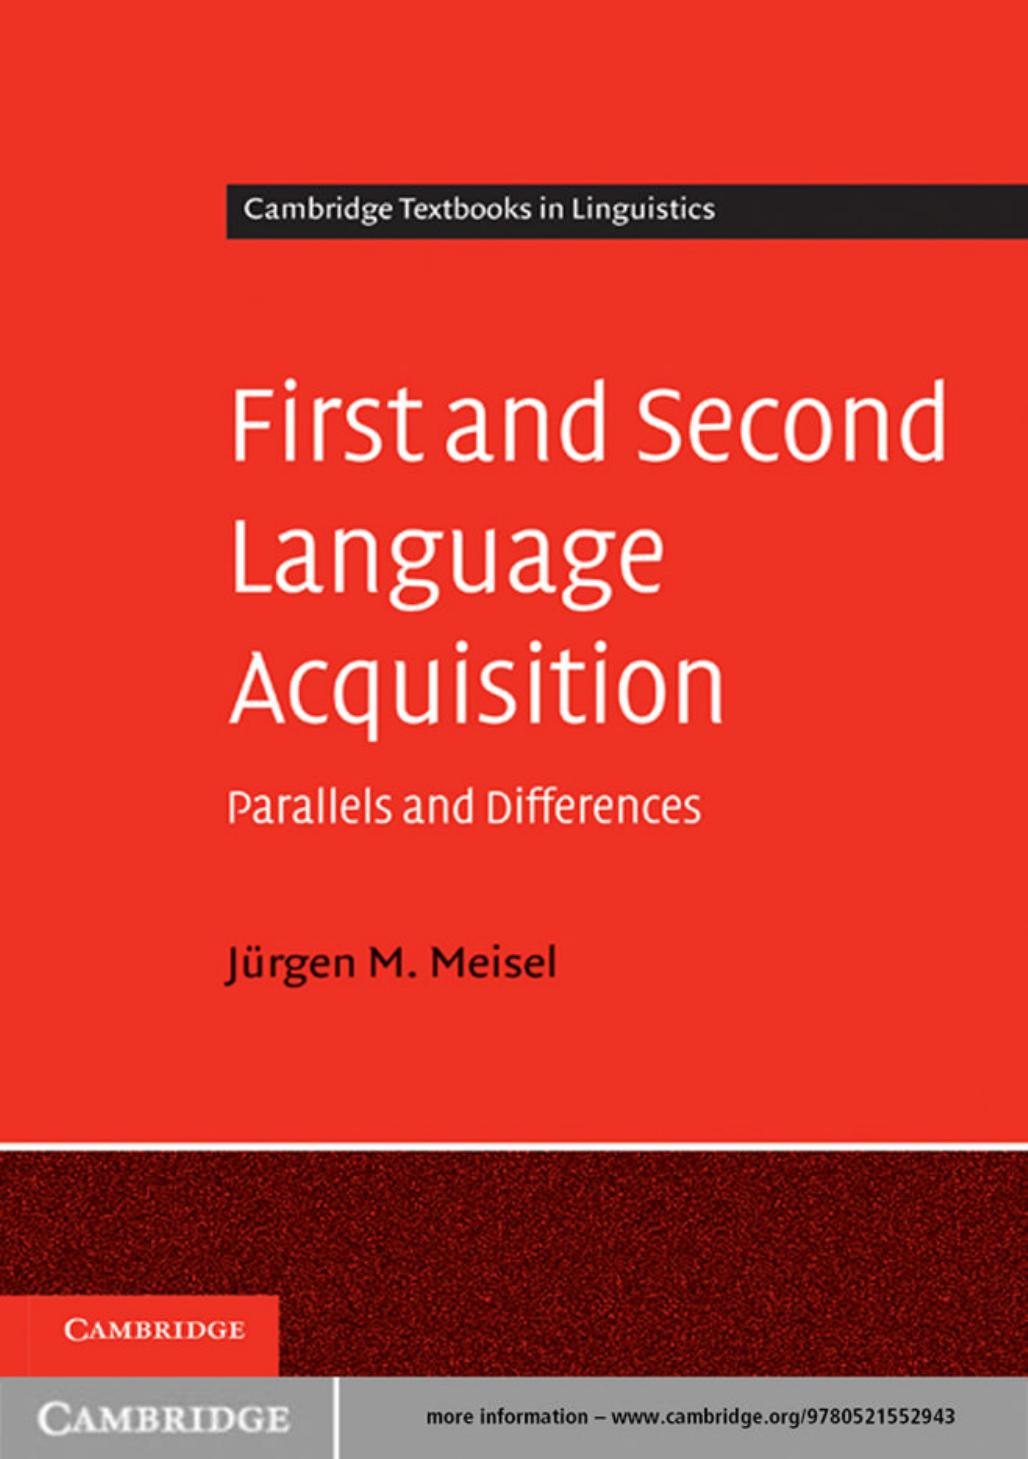 First and Second Language Acquisition: Parallels and Differences